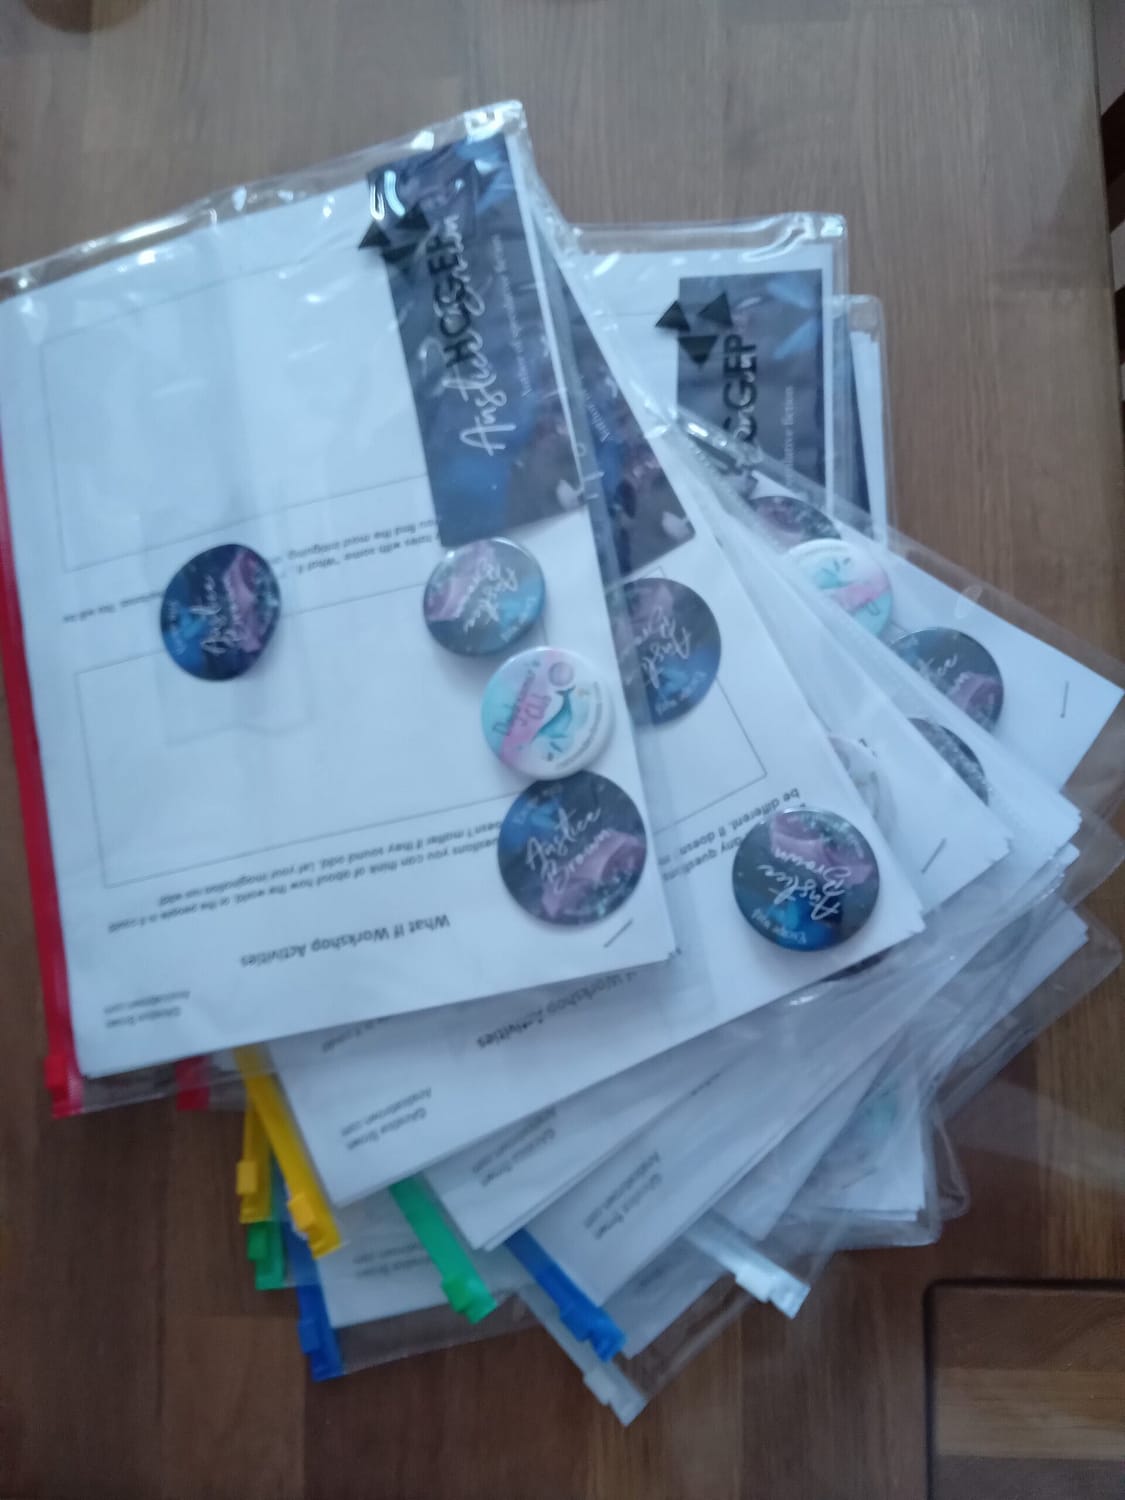 Writing packs for Anstice Brown's What If workshop, filled with story planning resources, pin badges and bookmarks